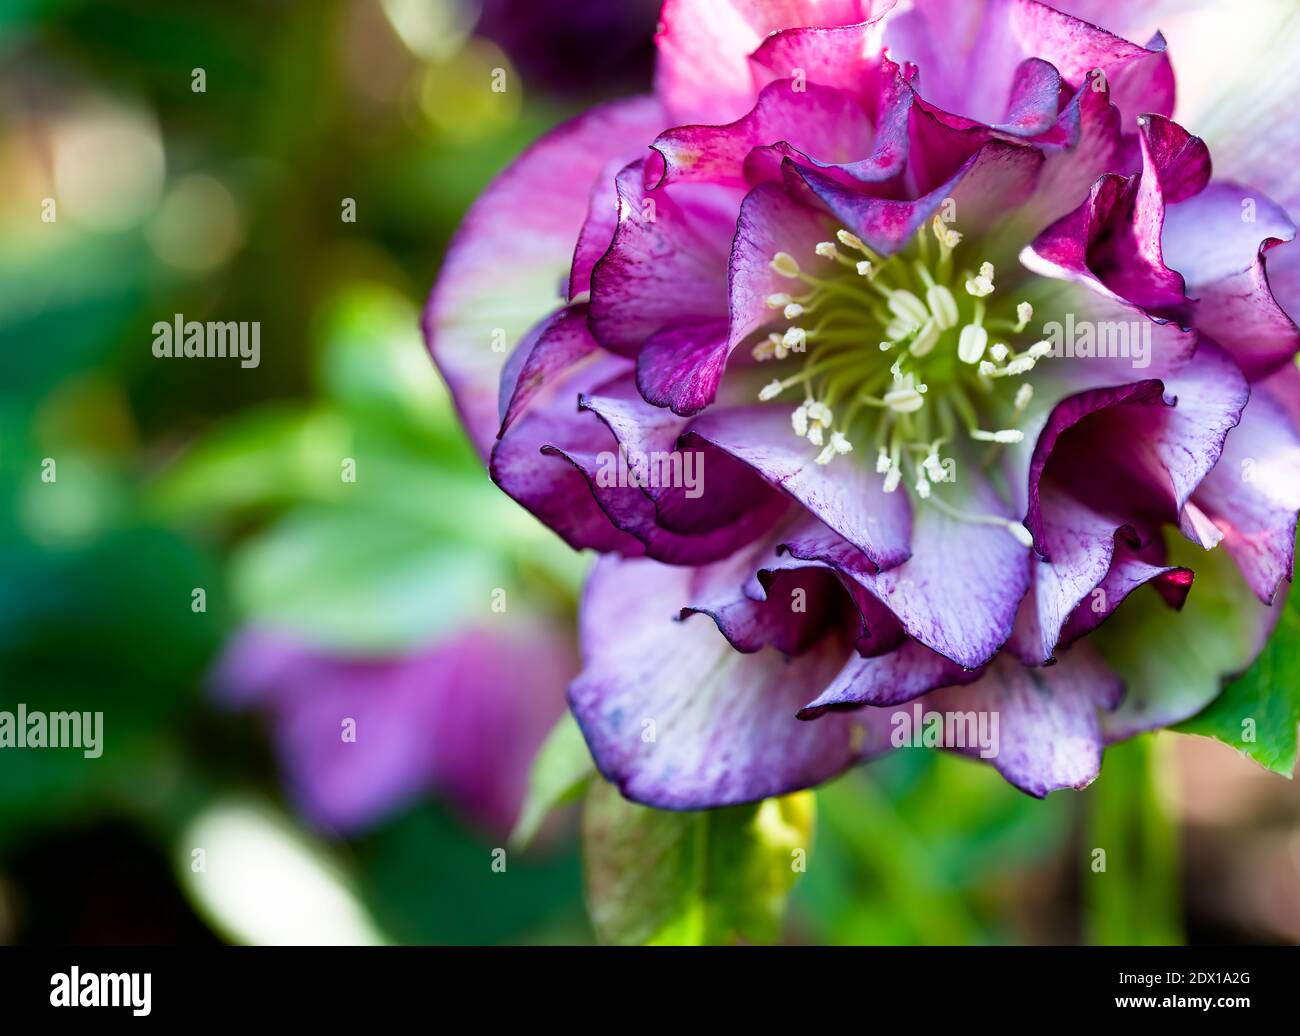 Hybrid hellebore (HELLEBORUS HYBRIDUS) double pink with dots of fuchsia color, green and blurry background, copy space. Stock Photo